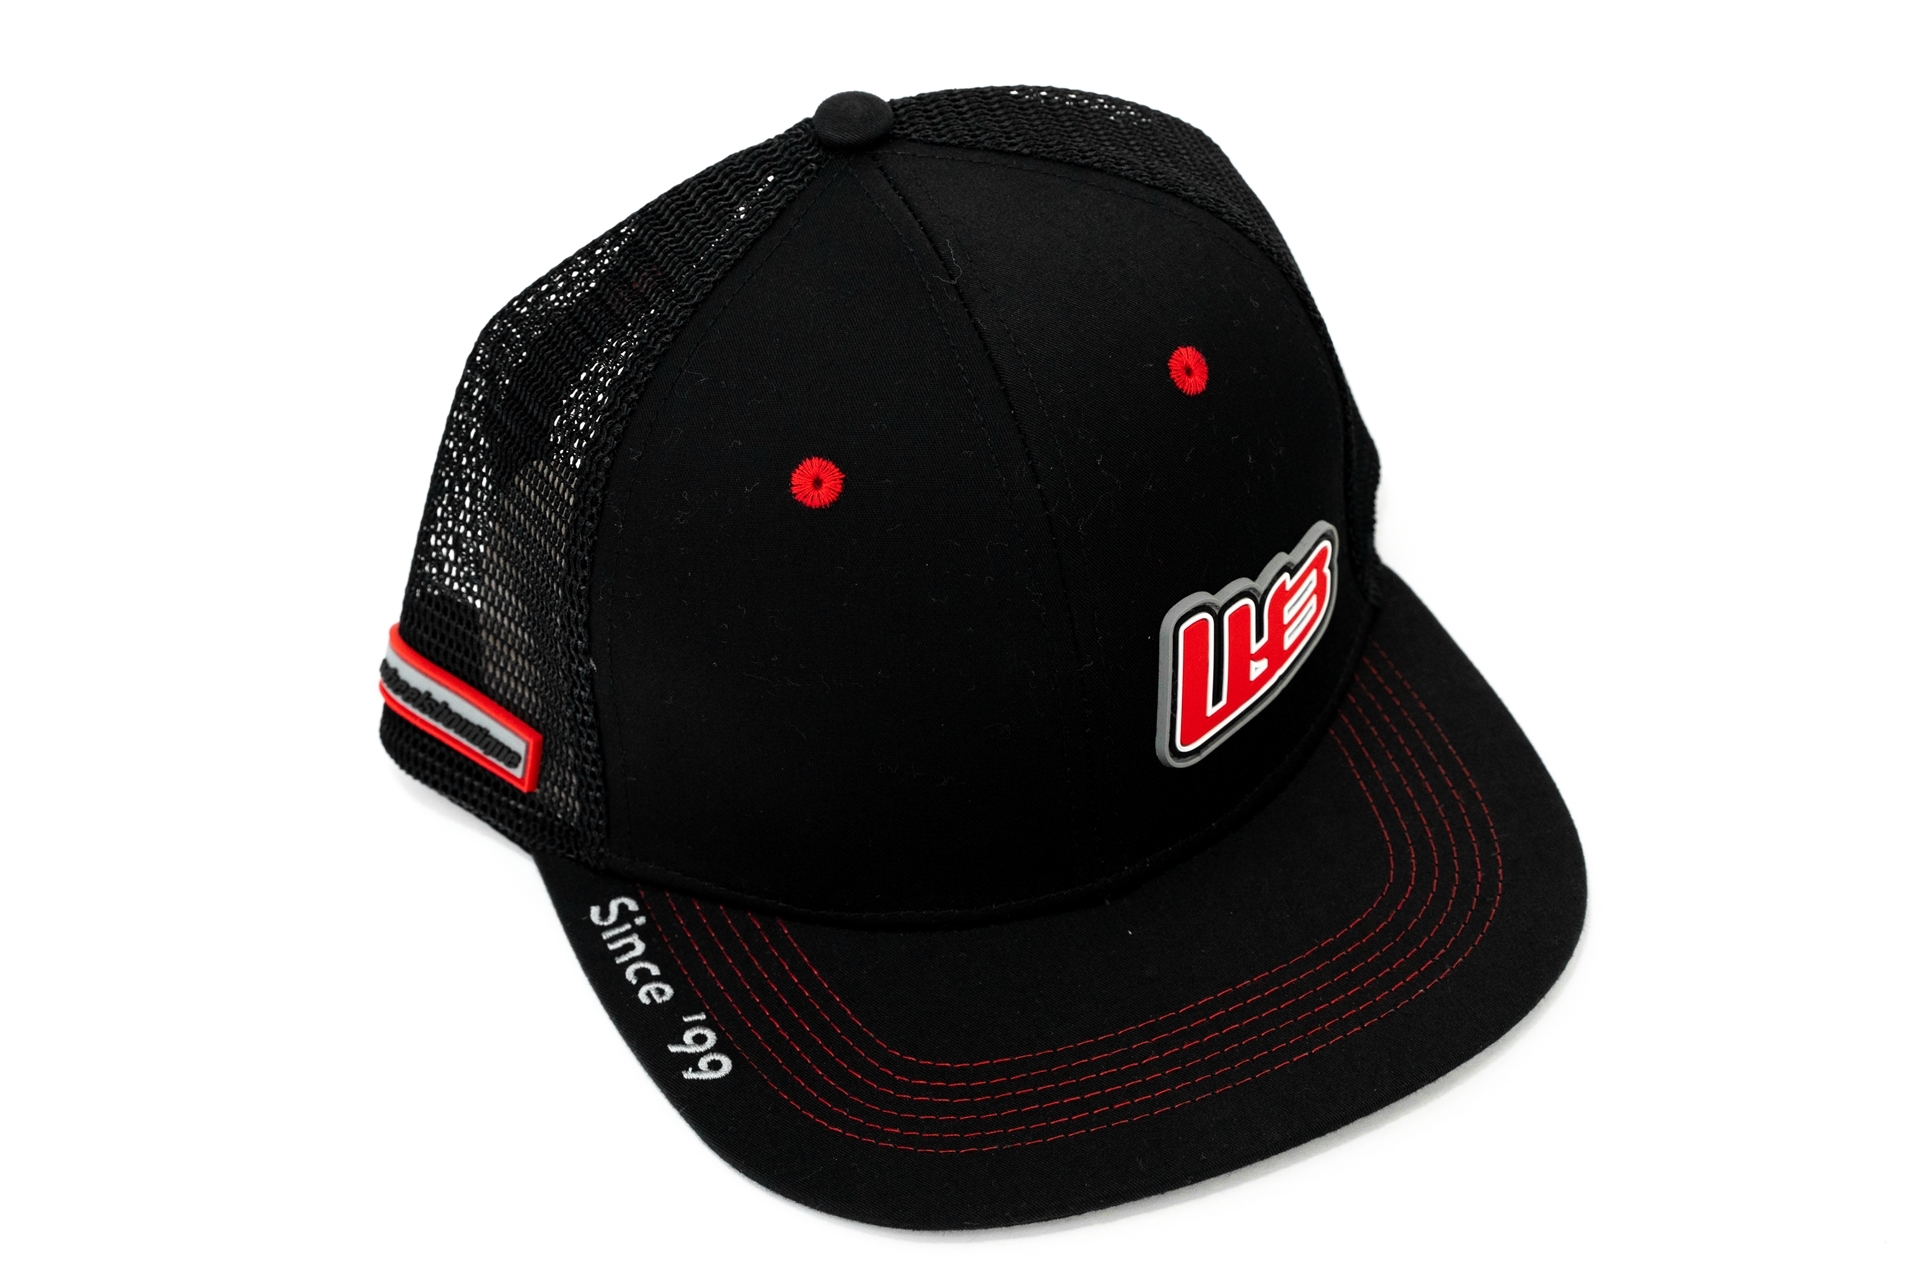 Trucker hat with red and black accents